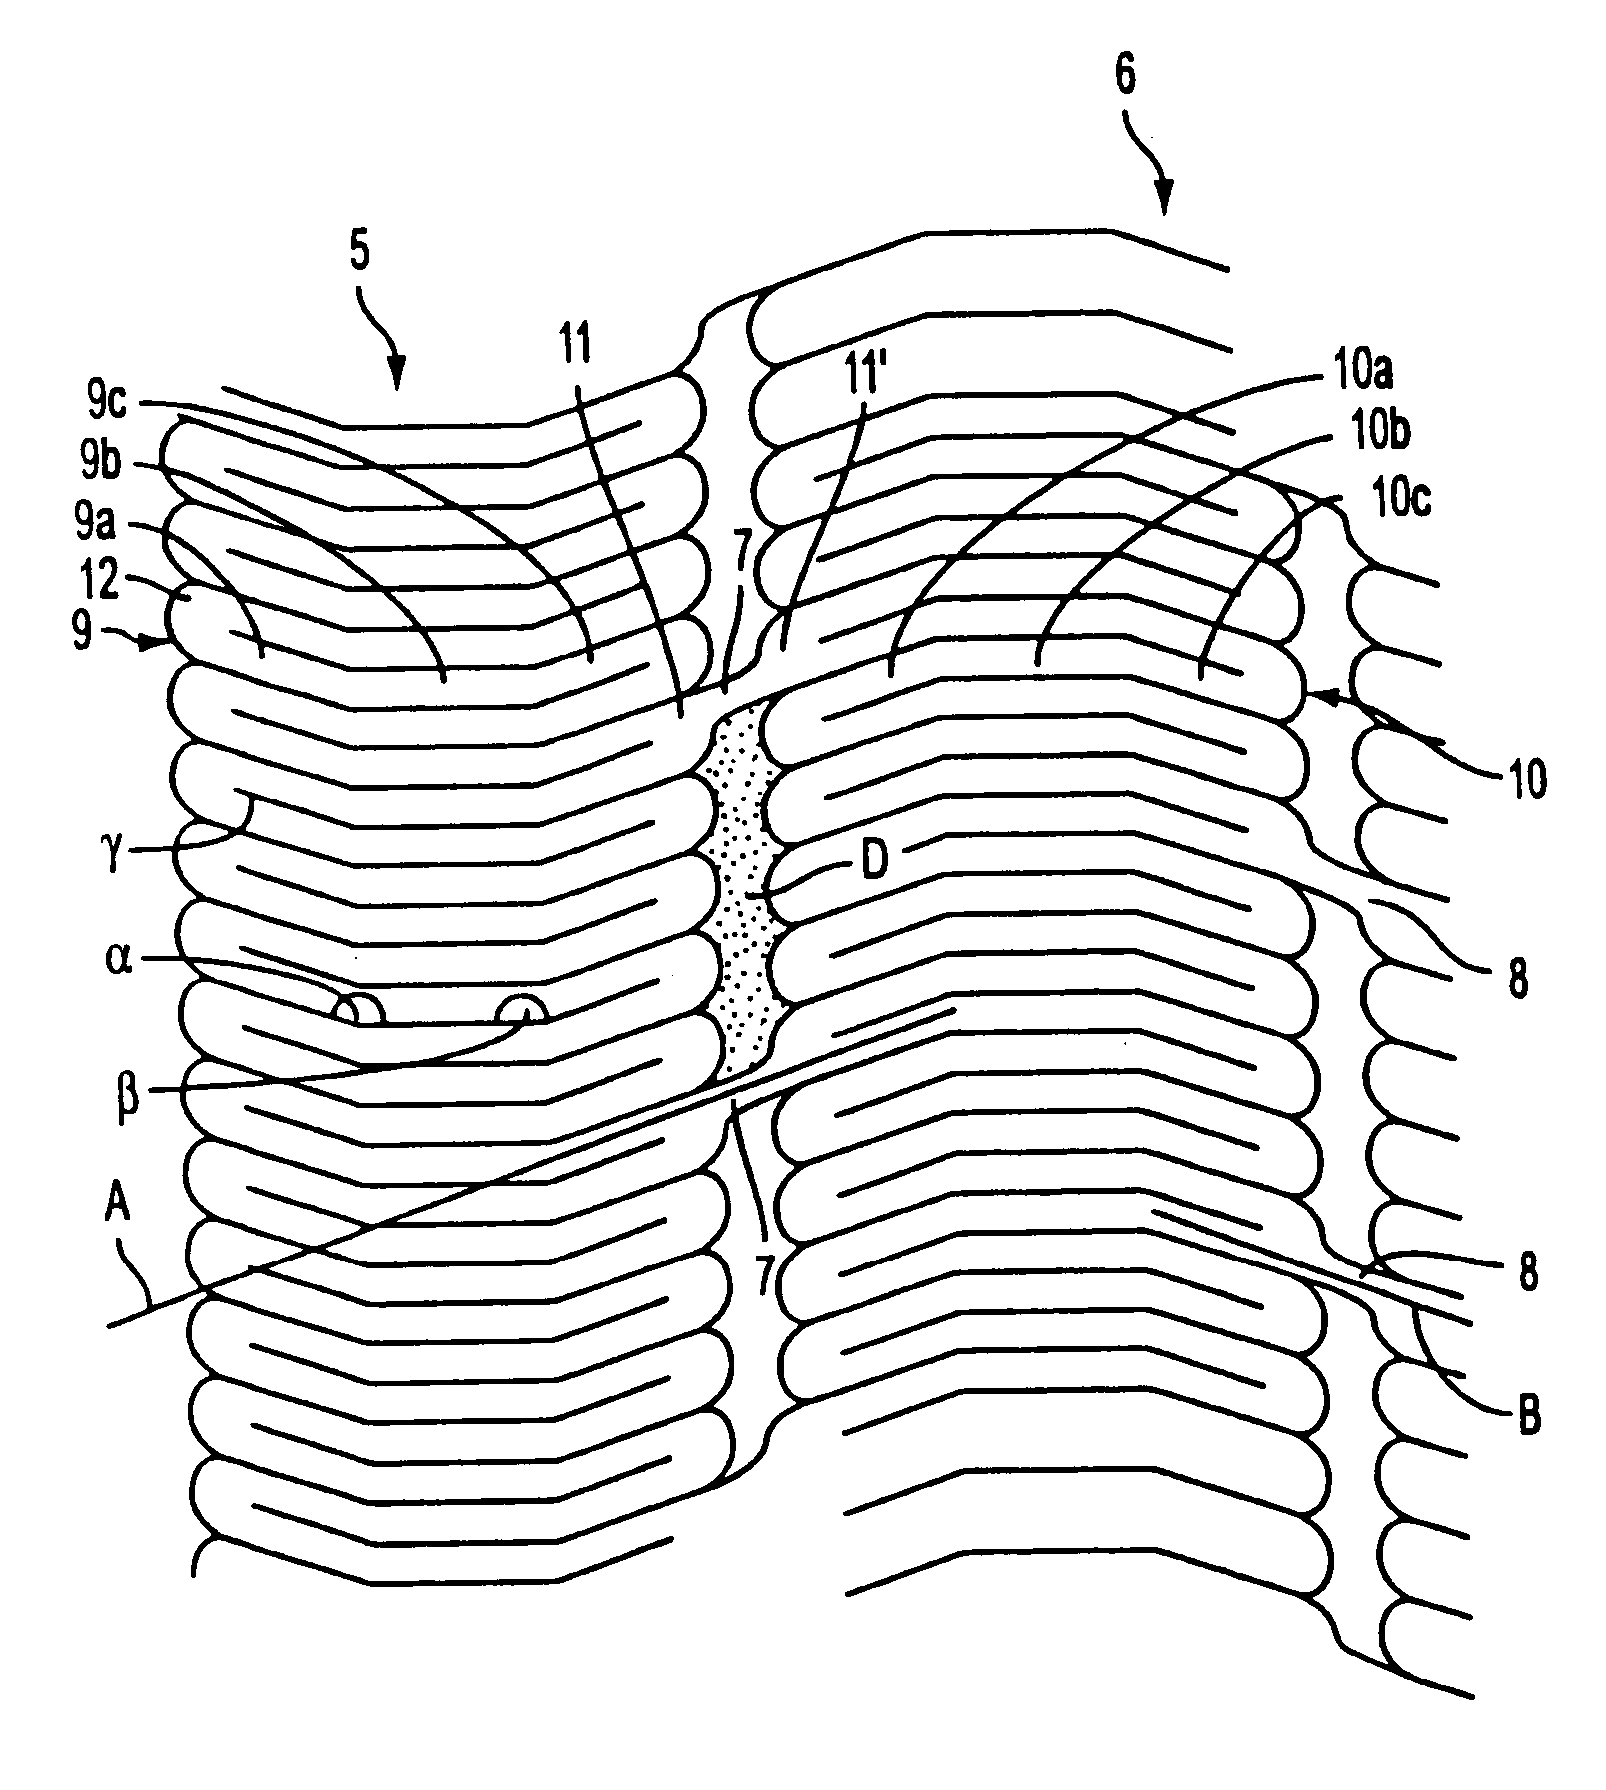 Methods and apparatus for stenting comprising enhanced embolic protections coupled with improved protections against restenosis and trombus formation